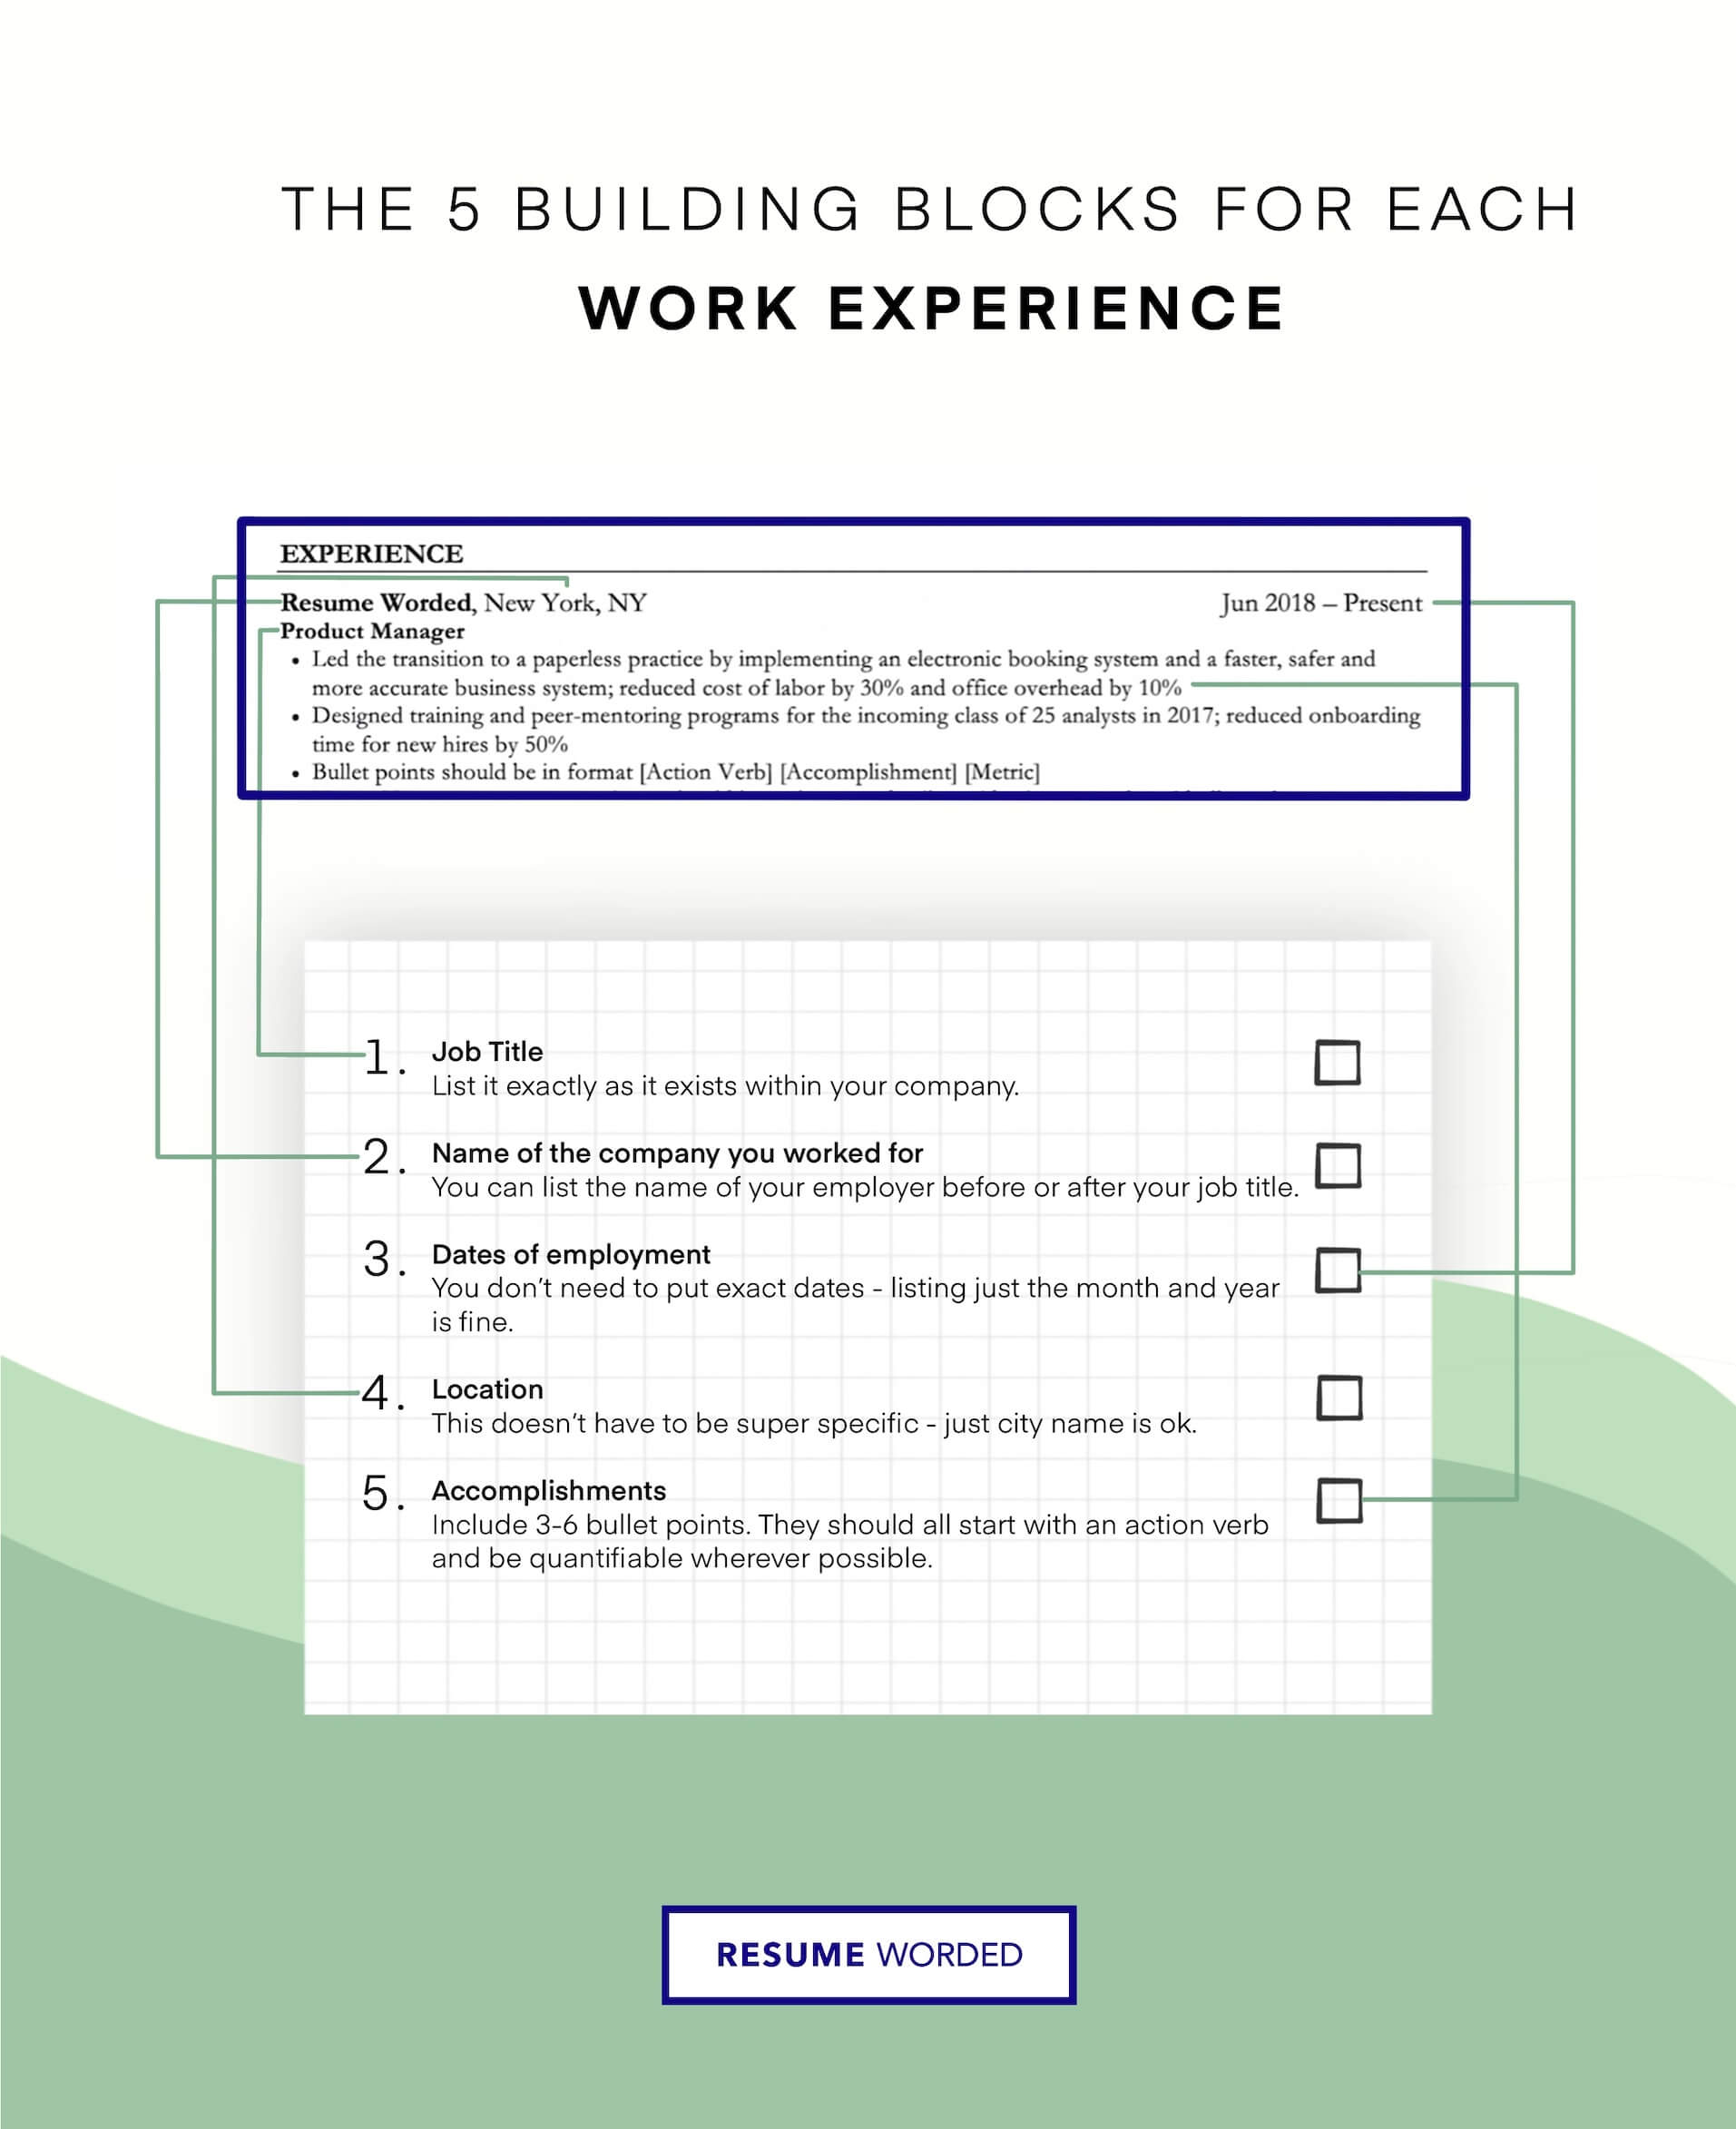 Show a variety of tasks in the experience section. - Business Development Intern Resume